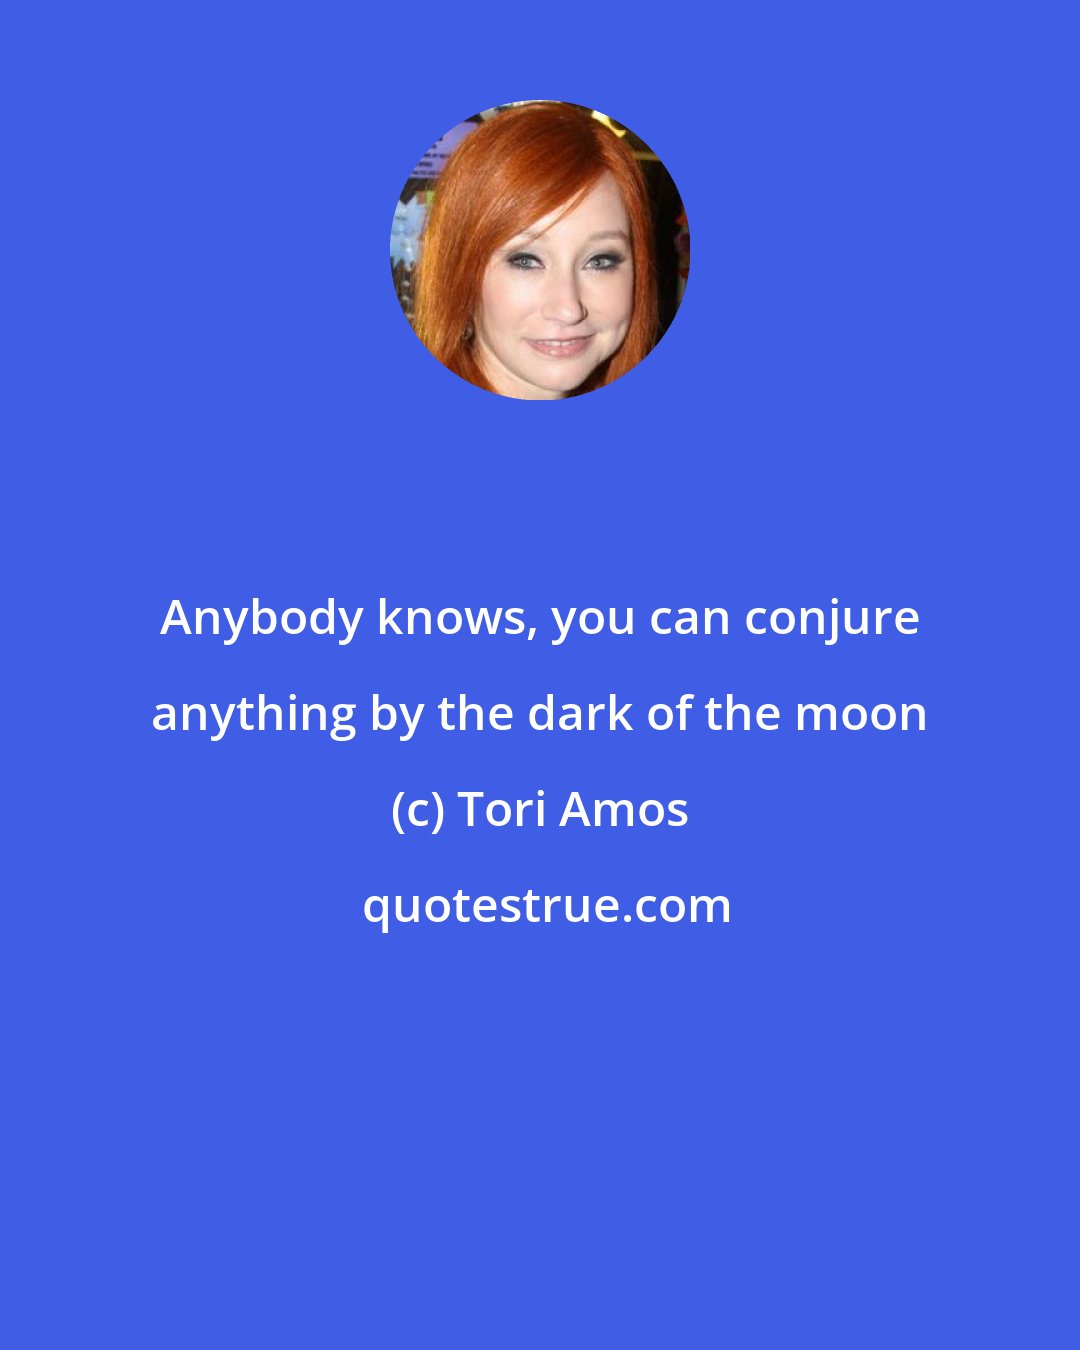 Tori Amos: Anybody knows, you can conjure anything by the dark of the moon